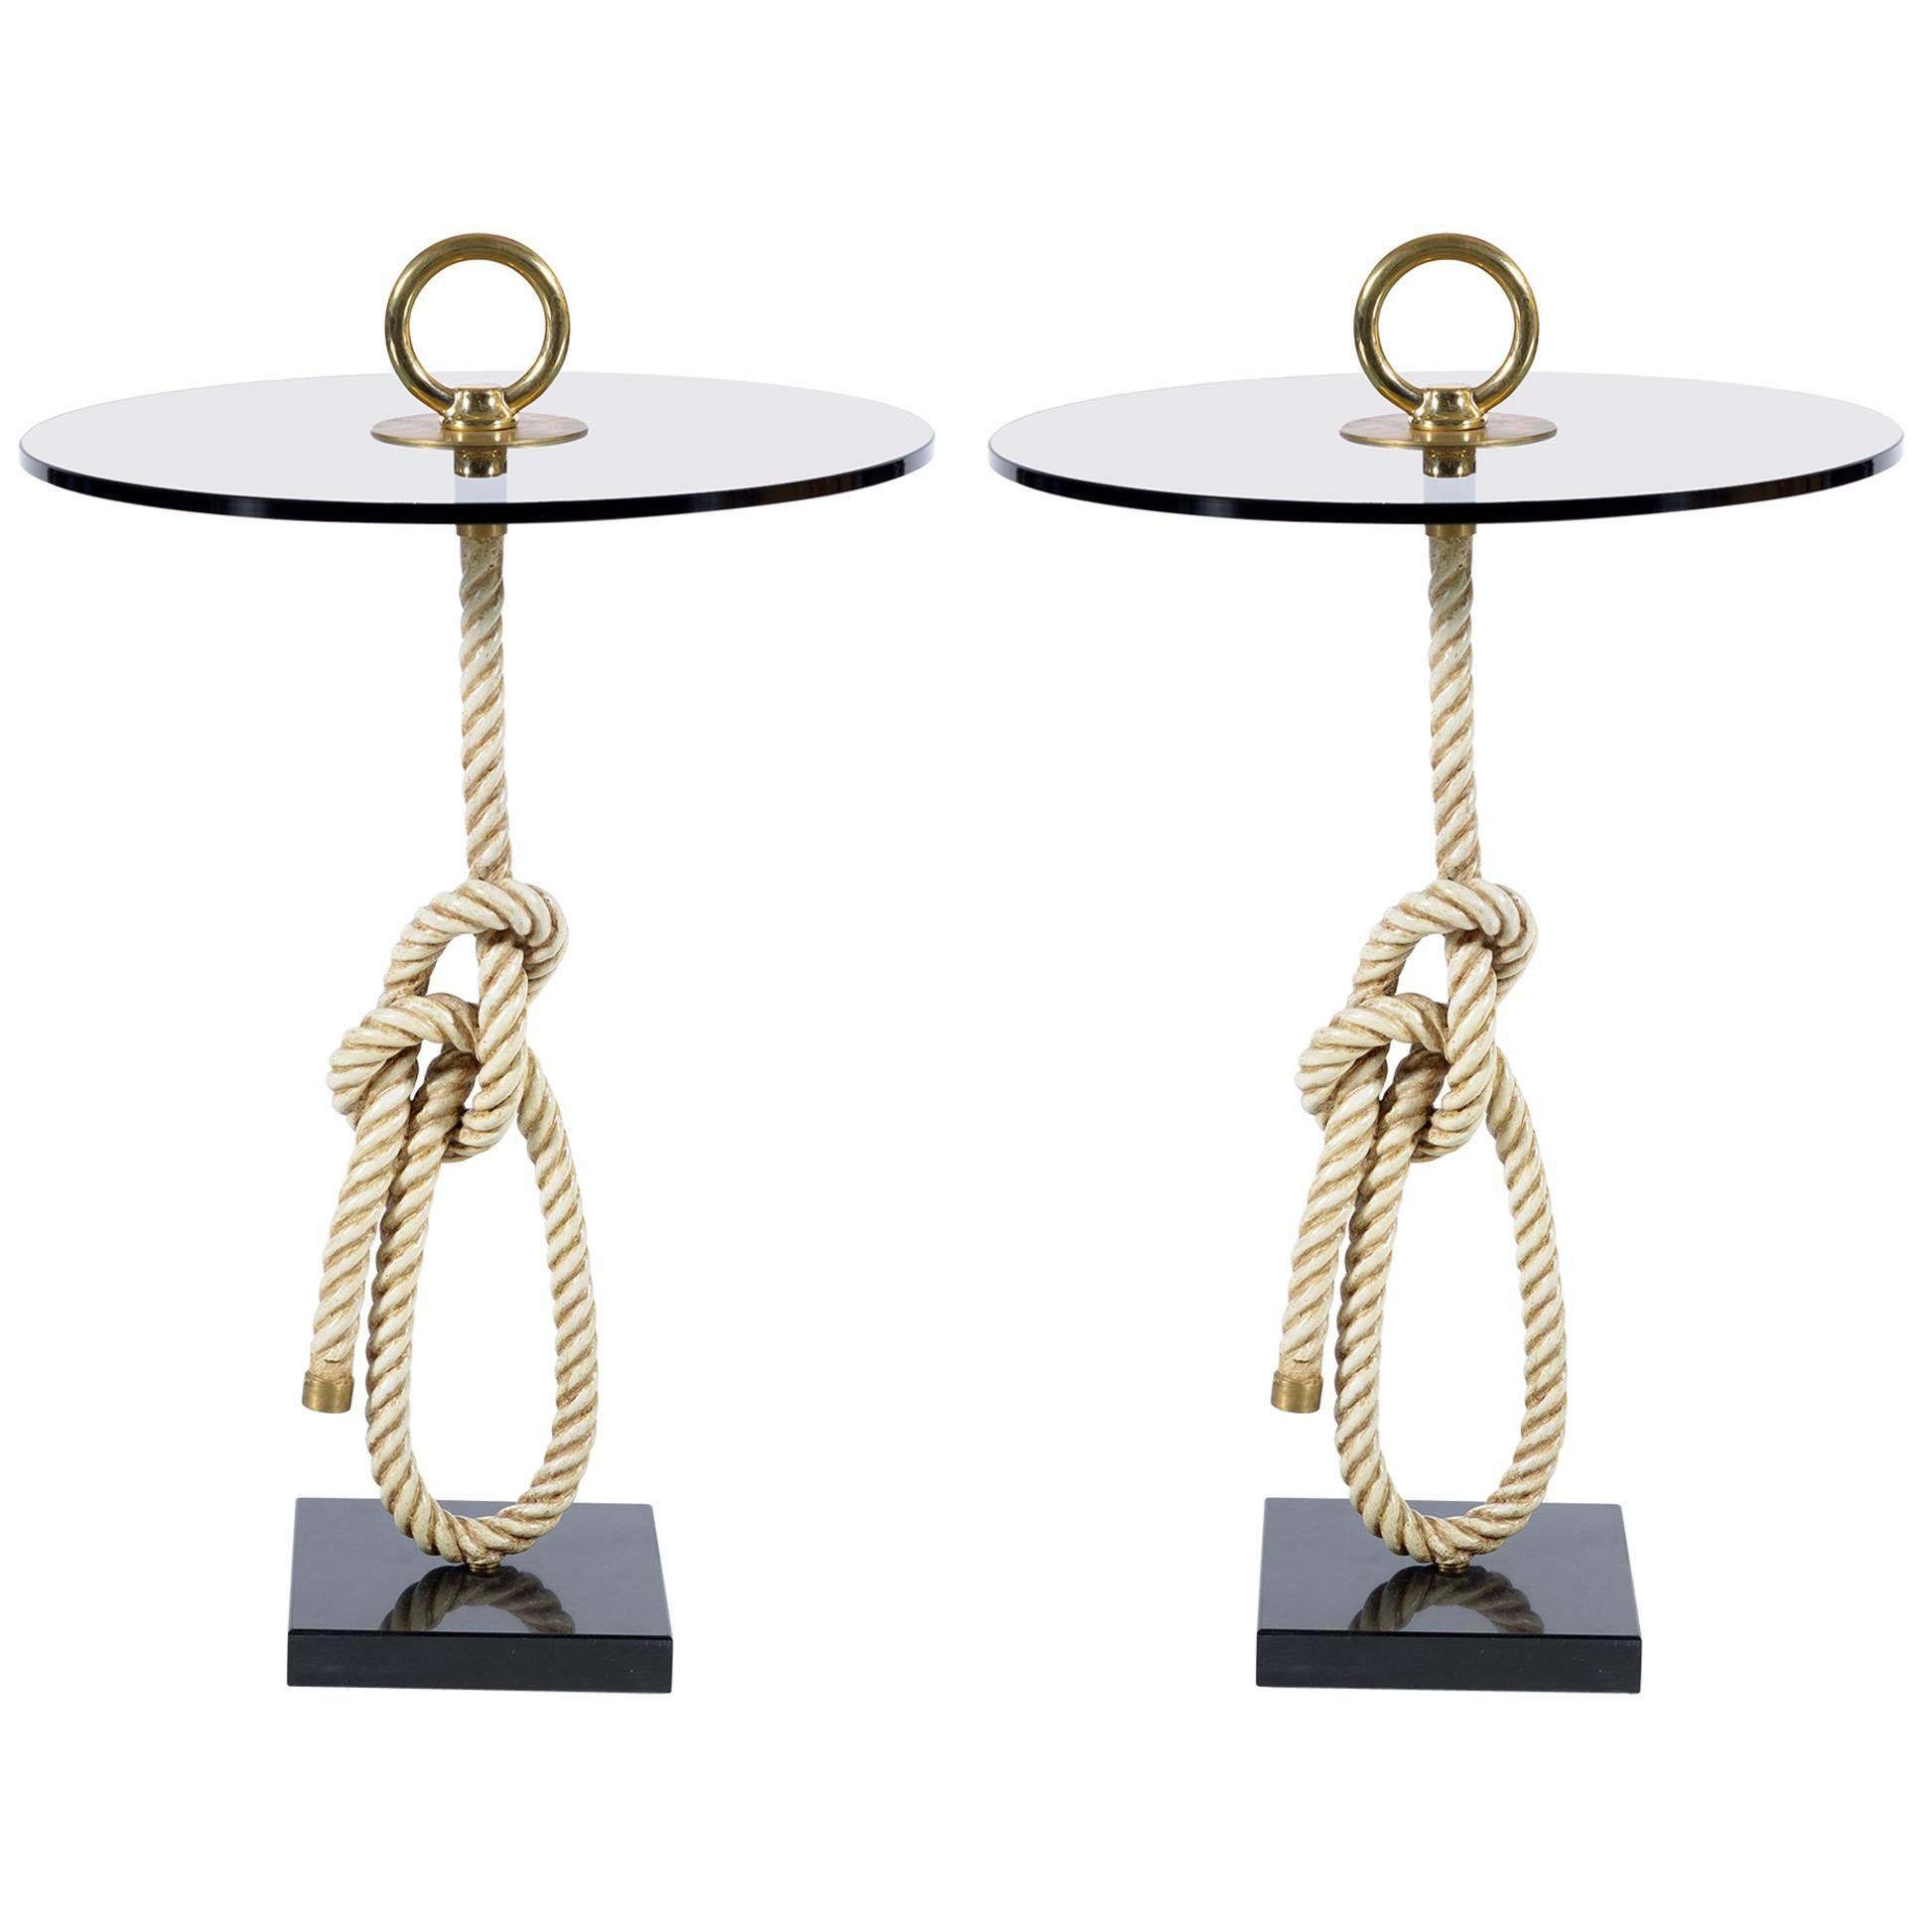 Midcentury Pair of Round "Rope" Side Table Bronze Handles Banci Firenze, Italy